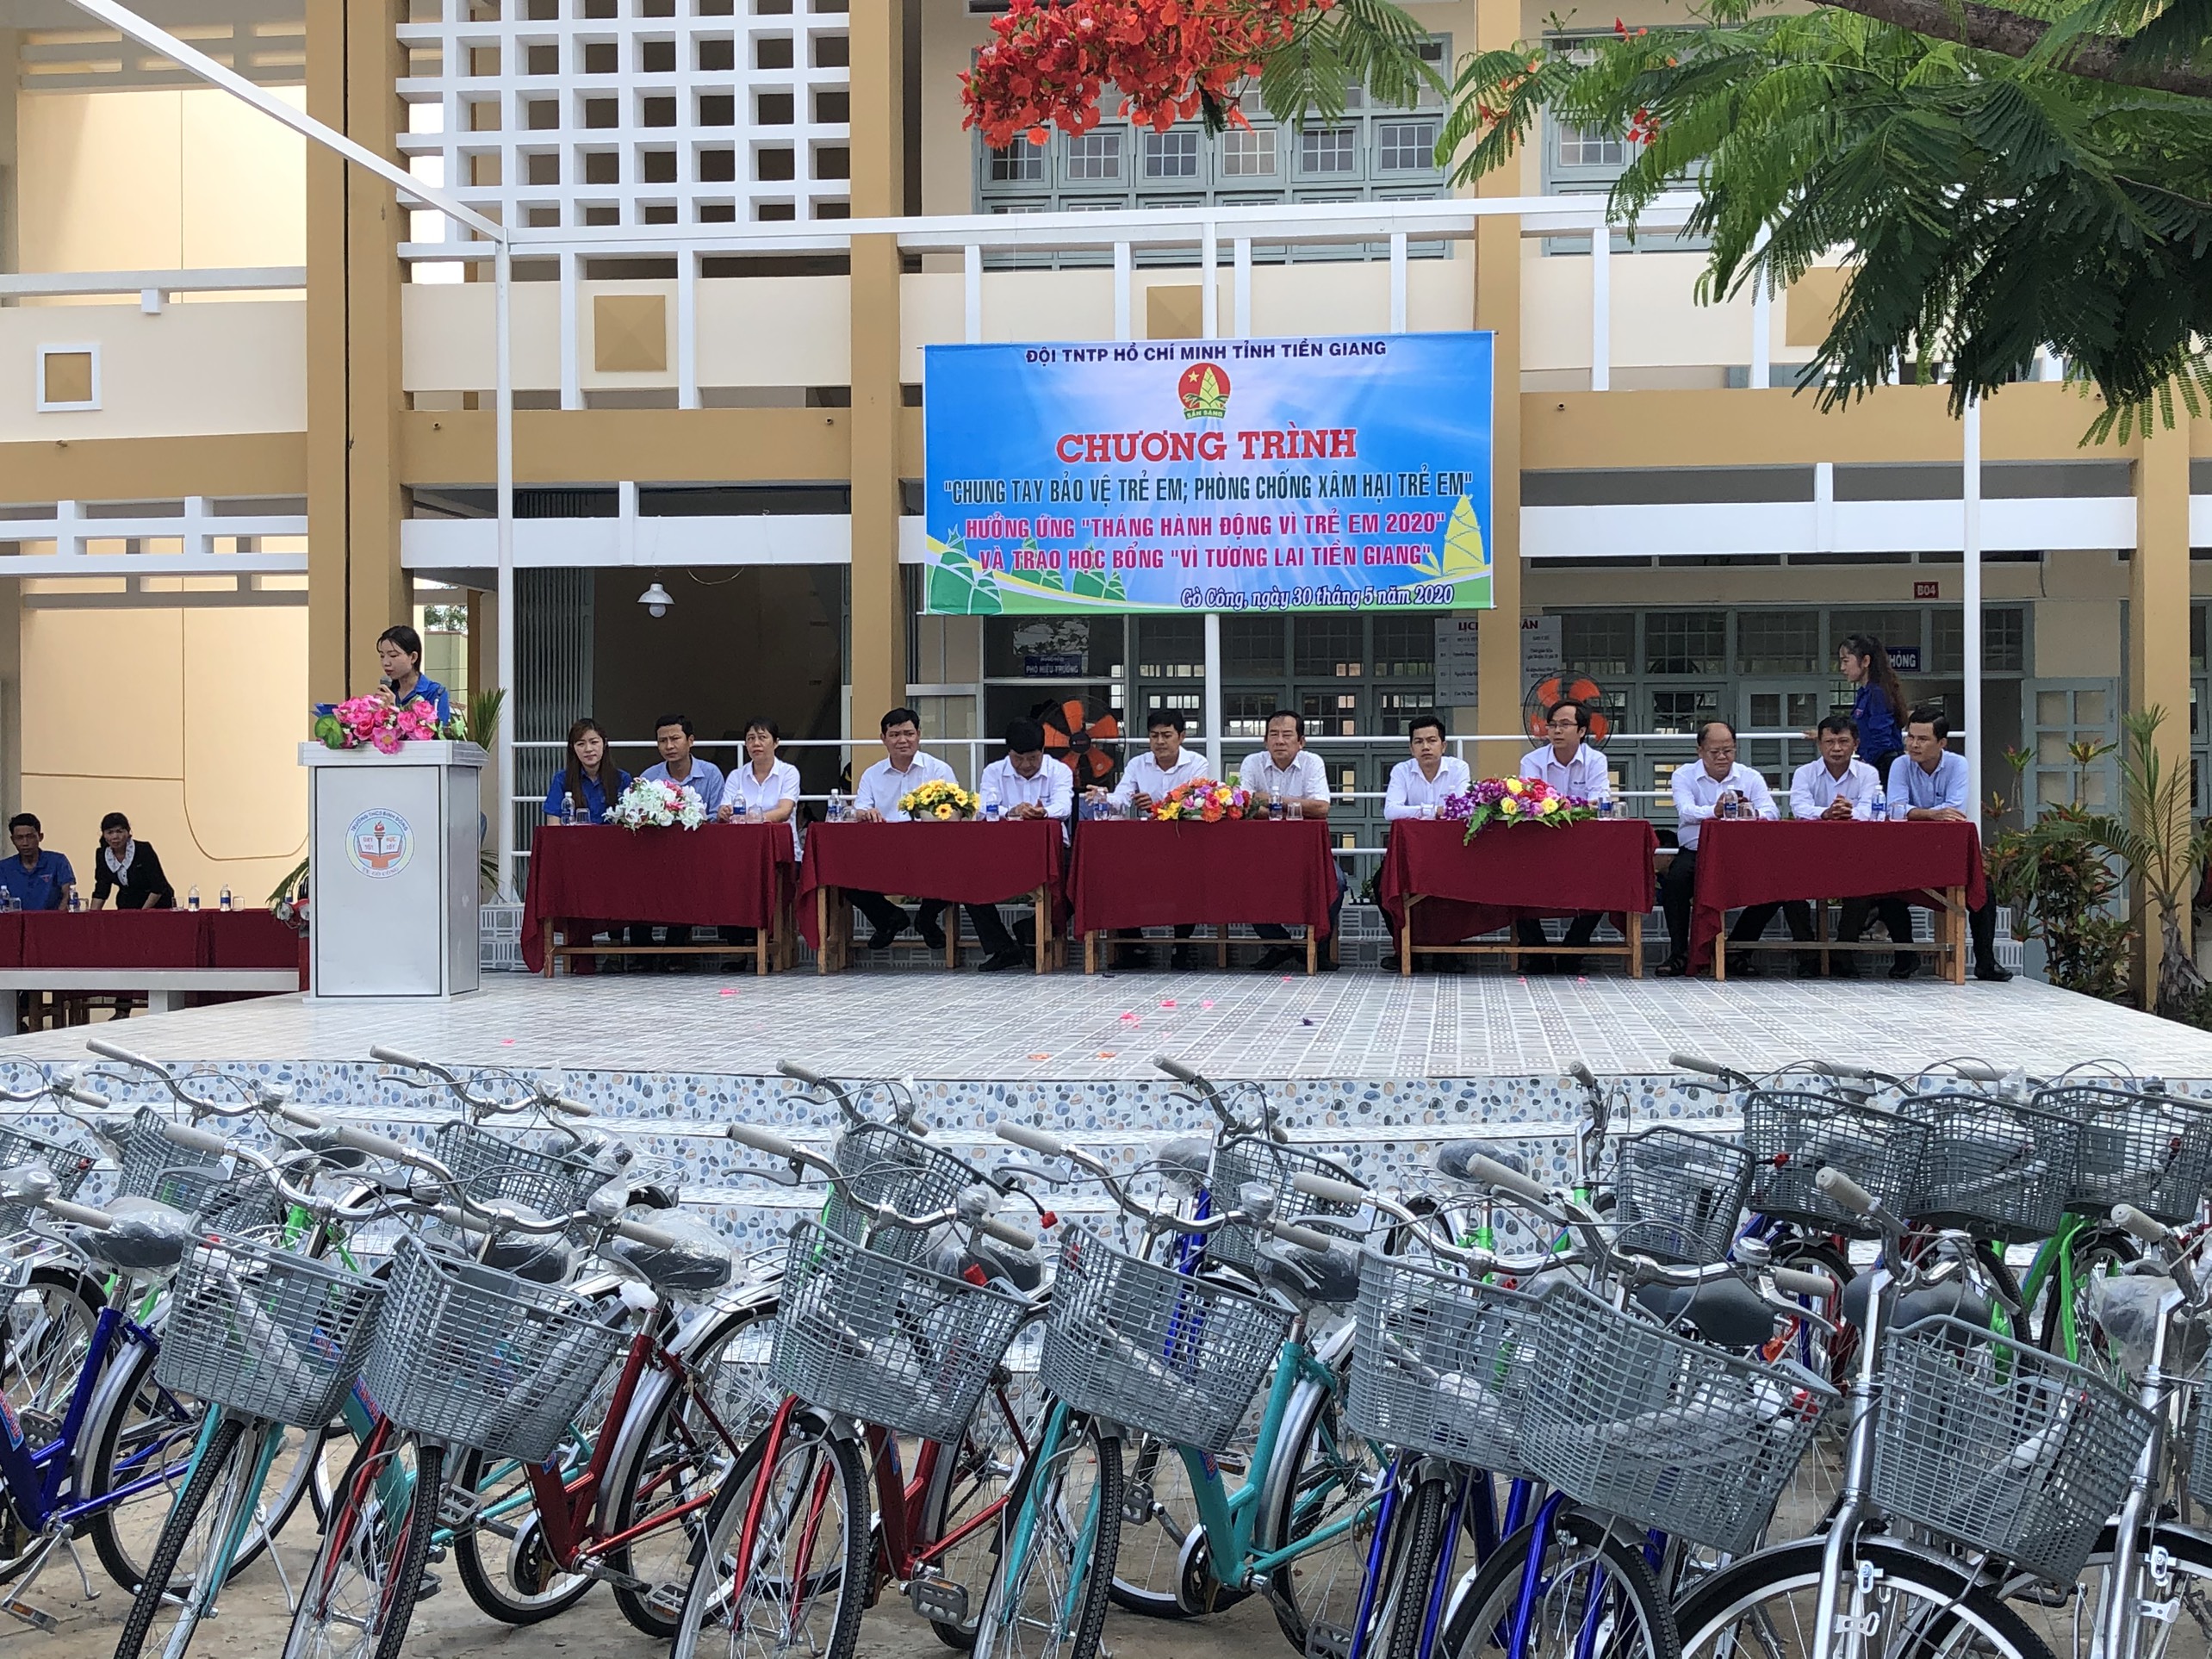 100 BIKES WERE DONATED TO POOR PUPILS IN BINH DONG SECONDARY SCHOOL, TIEN GIANG PROVINCE